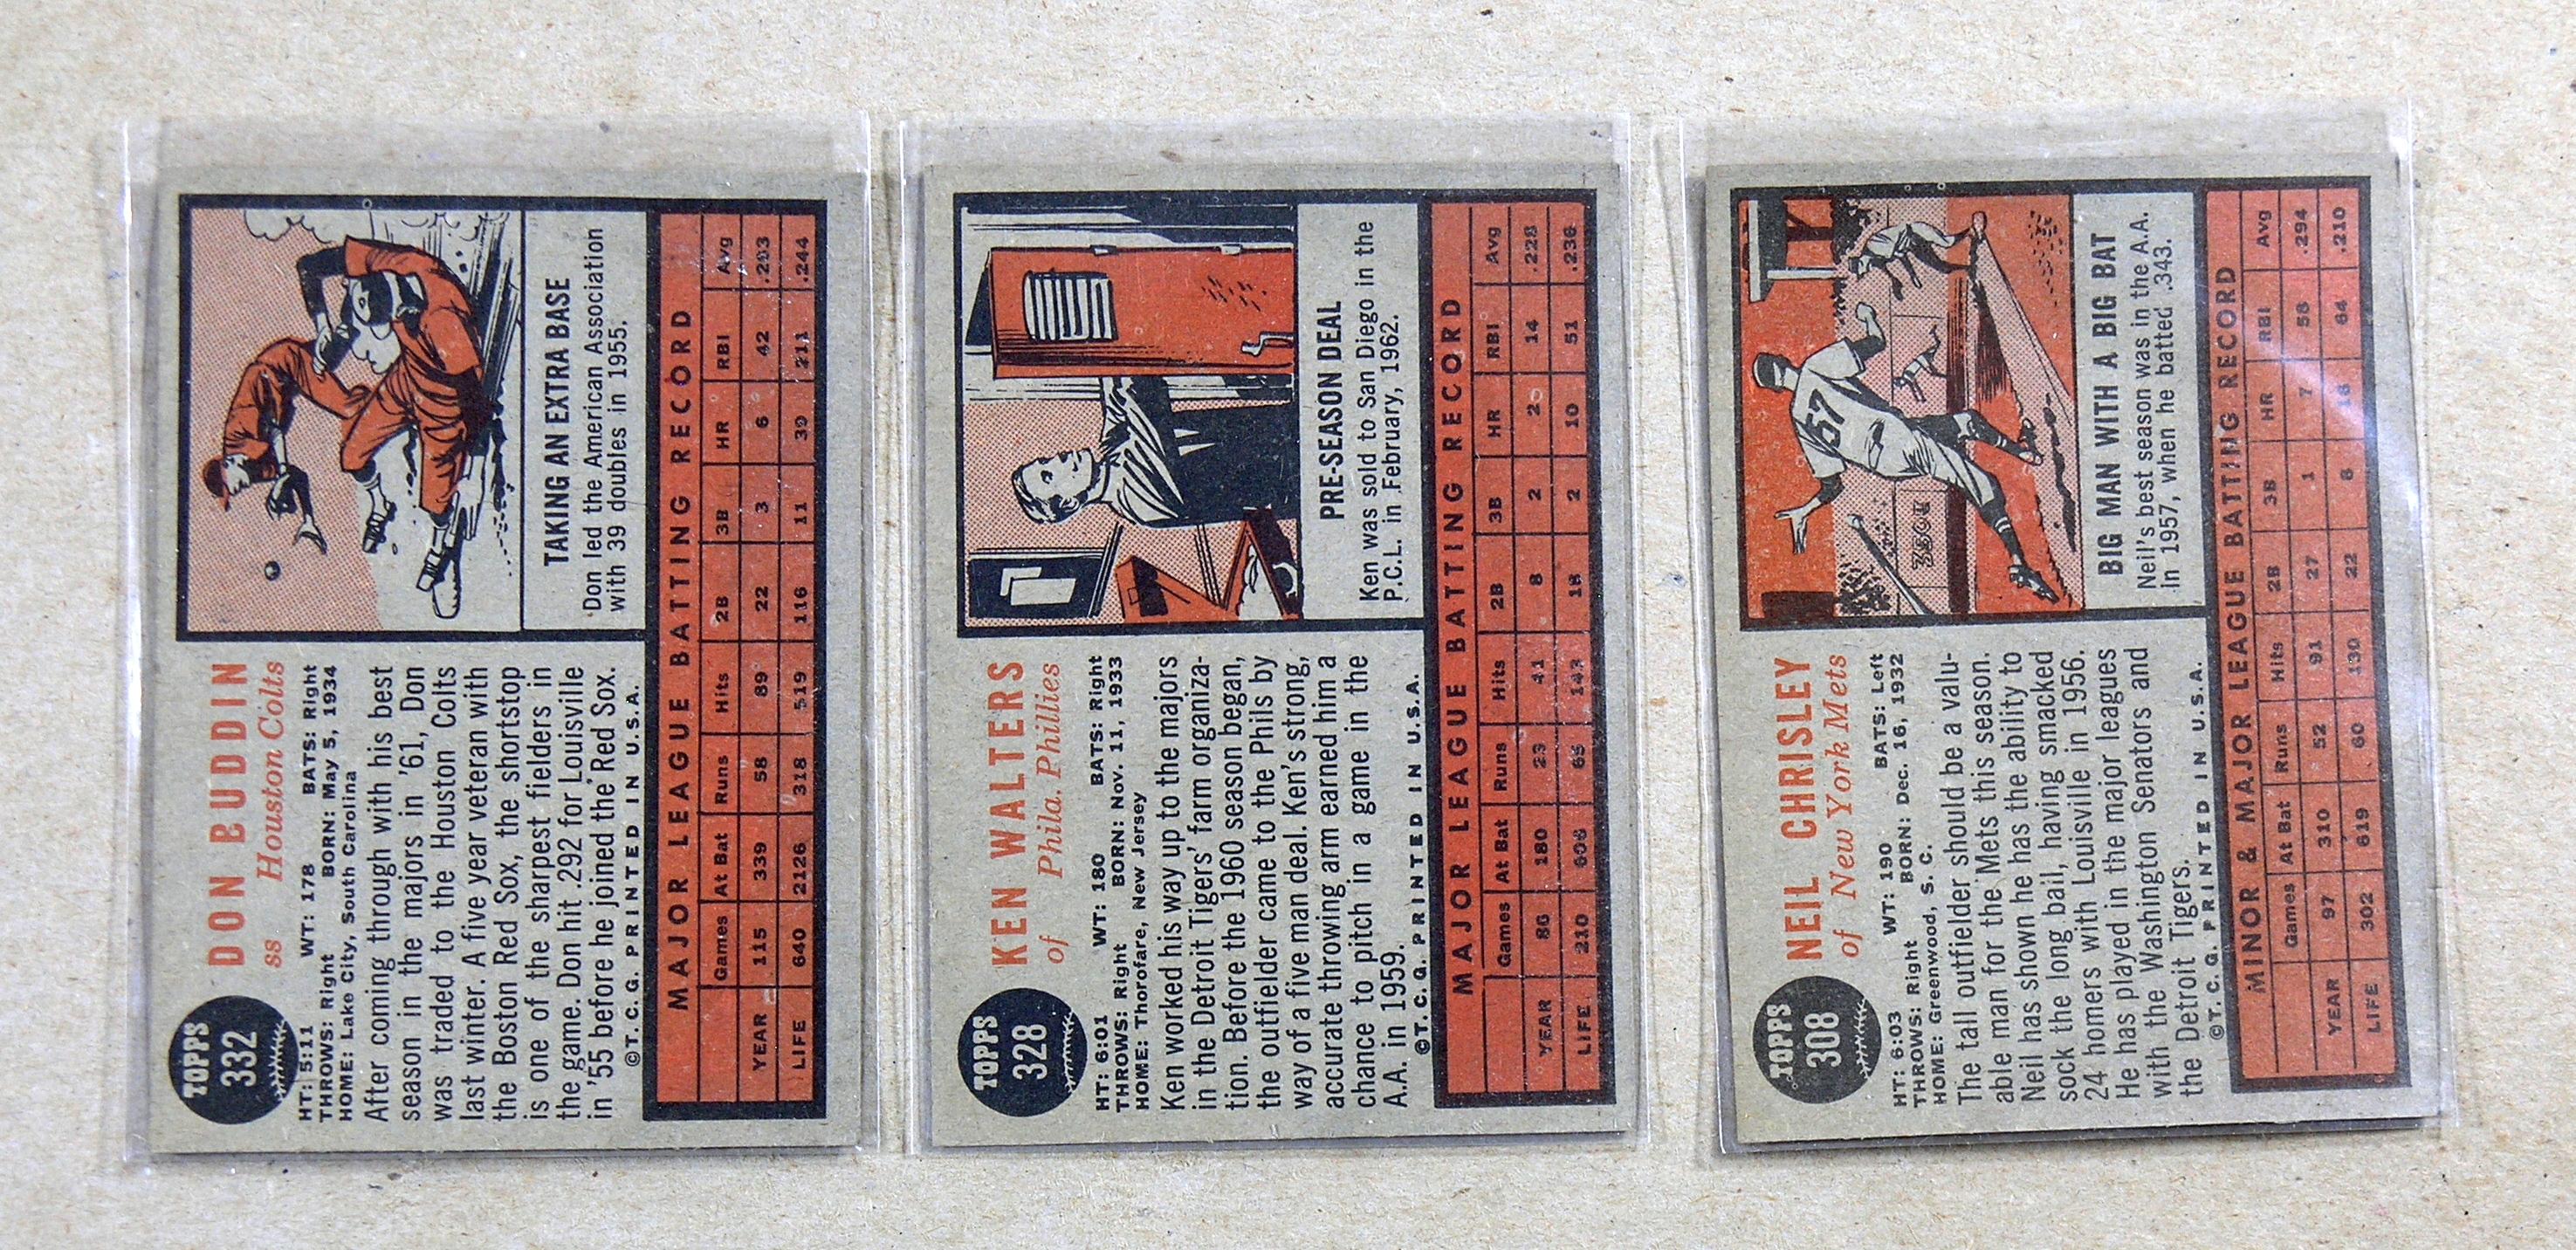 (16) 1962 Topps Baseball Cards VG/EX Conditions. No Creases